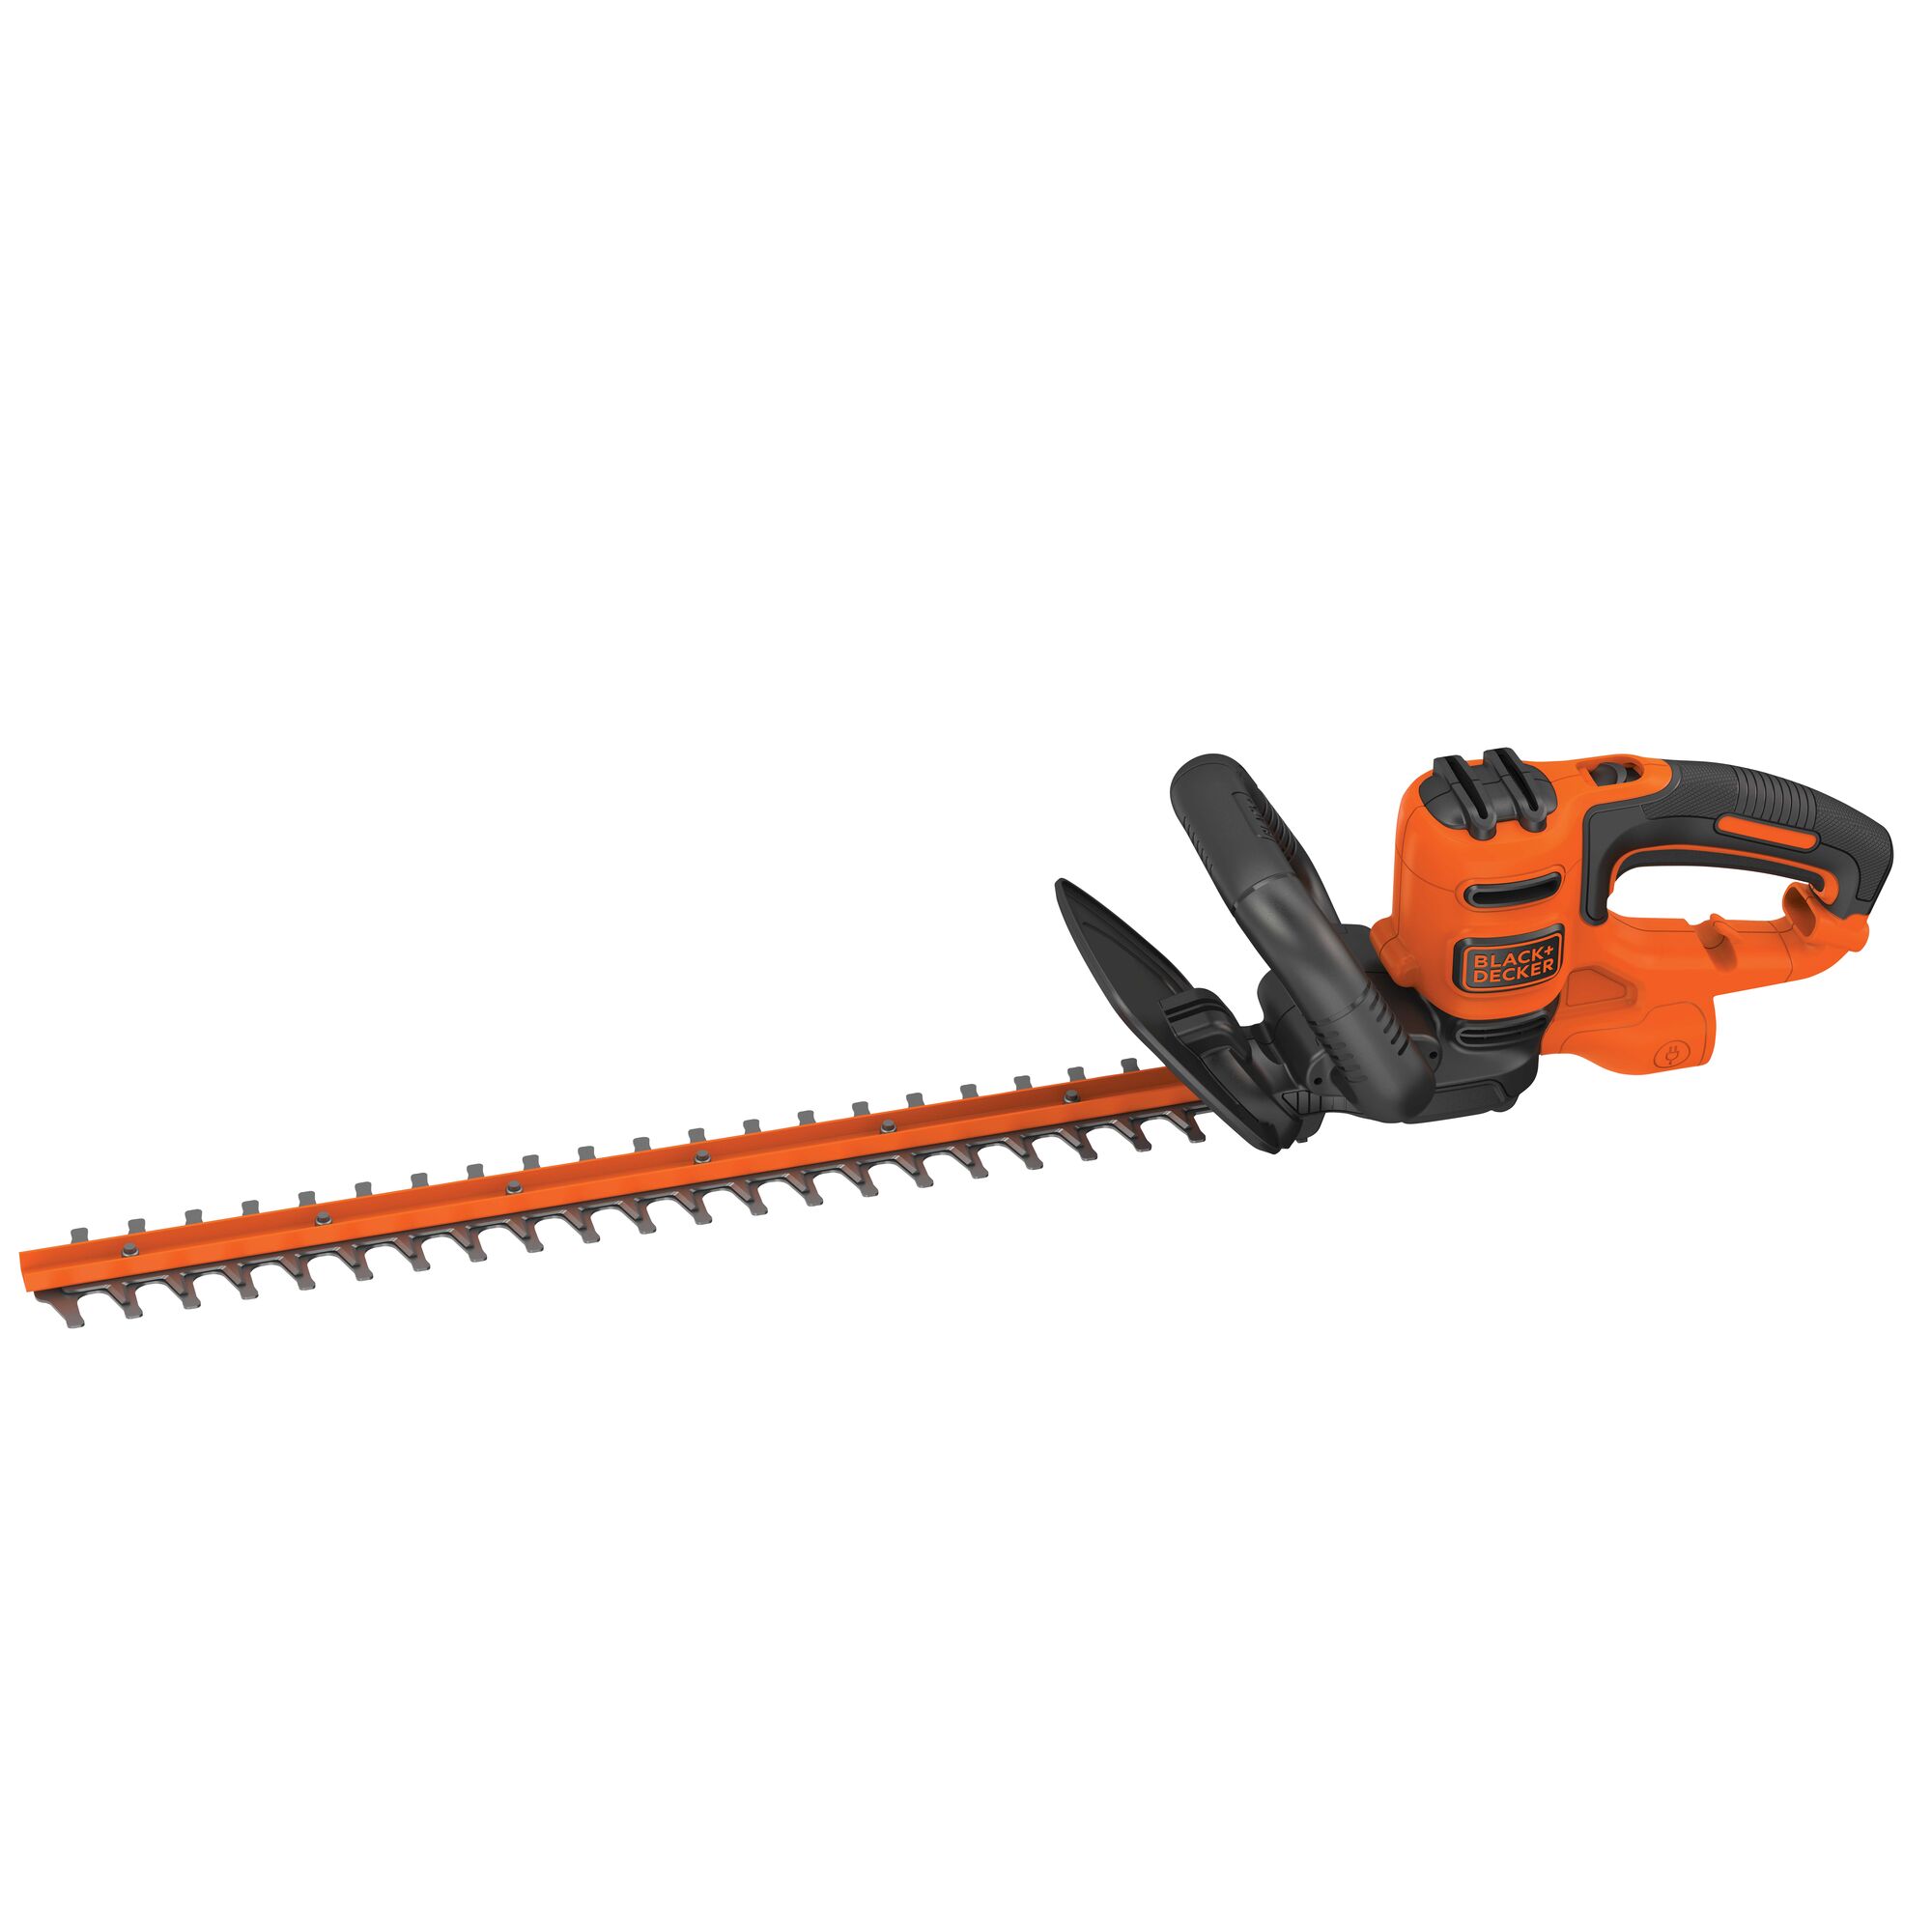 22 inch Electric Hedge Trimmer.